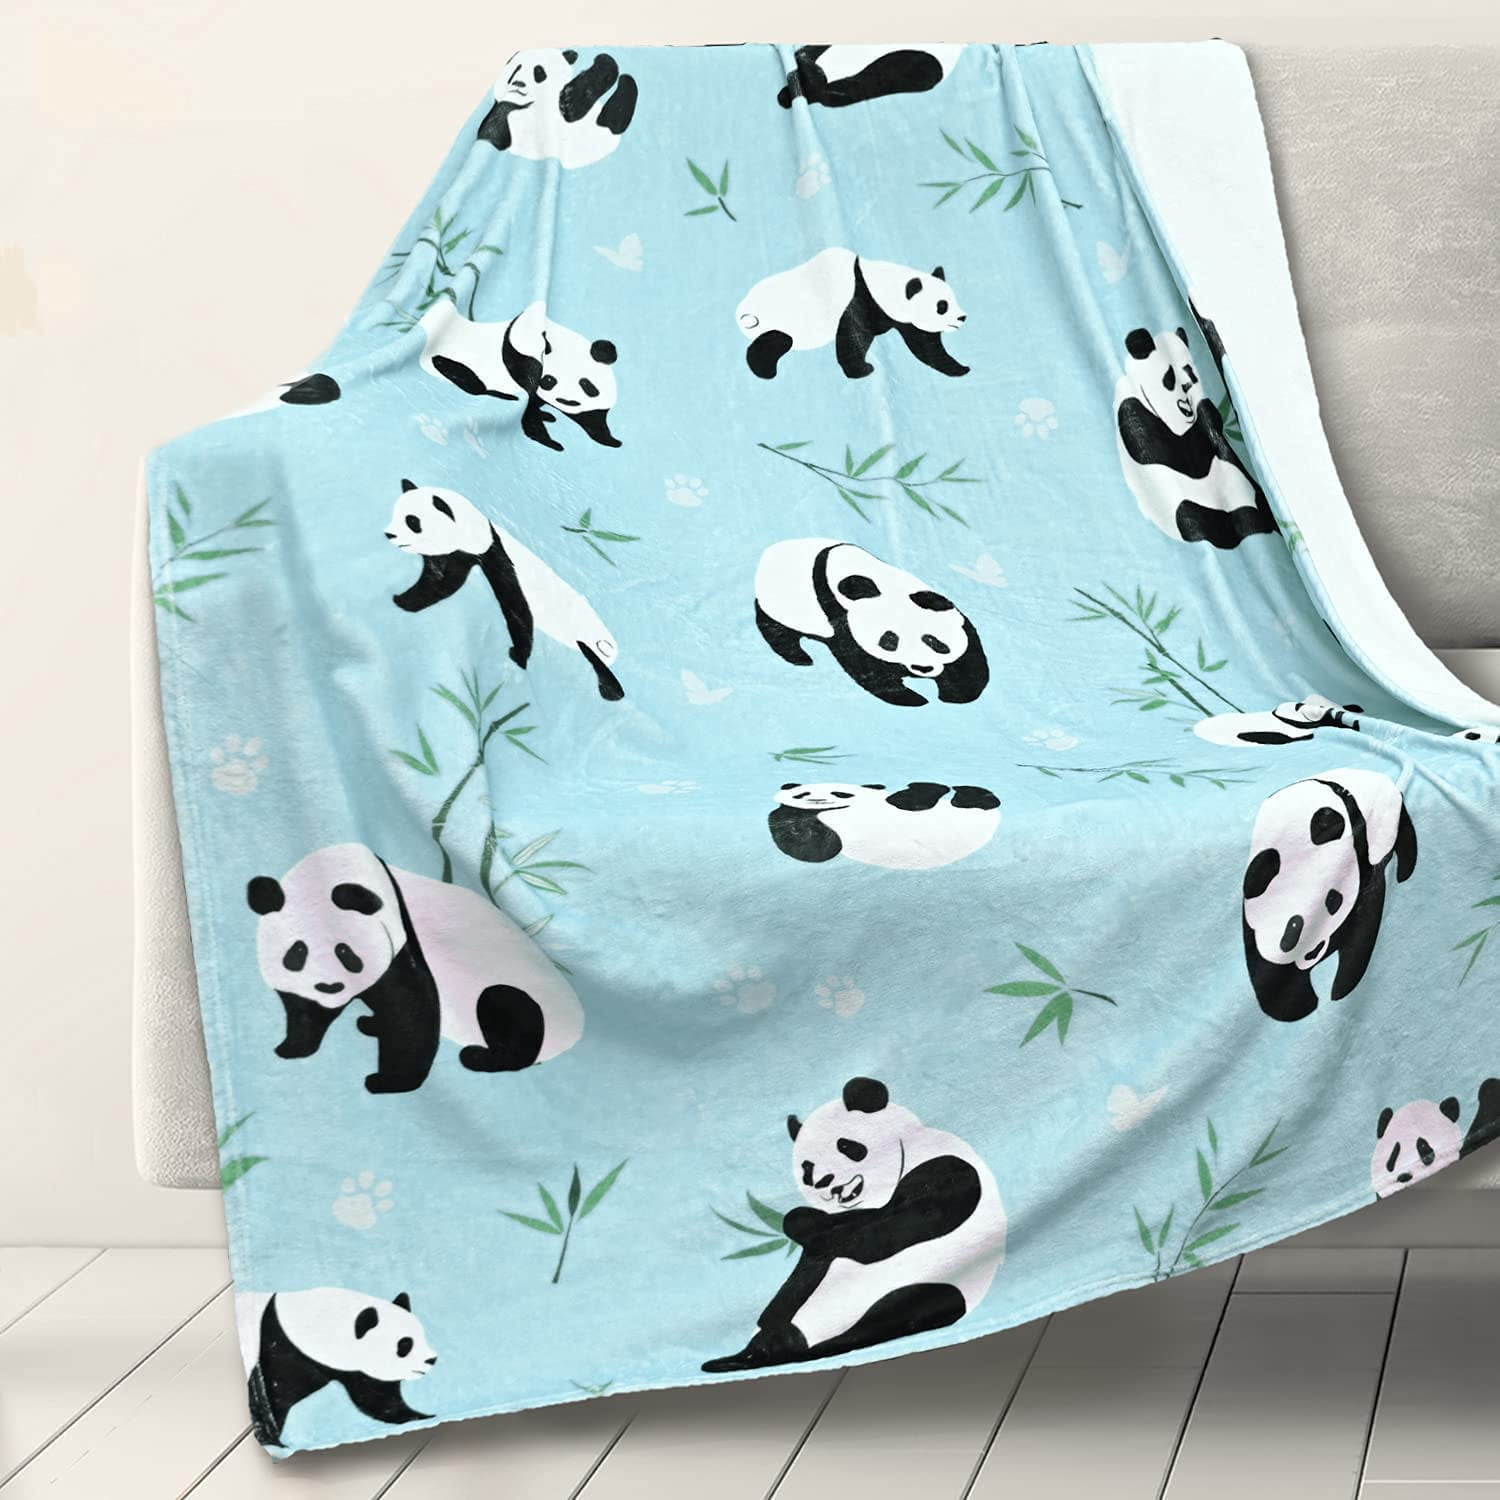 fleece plush Throw Blanket Details about   Cute animal print Gift for Kids boy girl Adults 